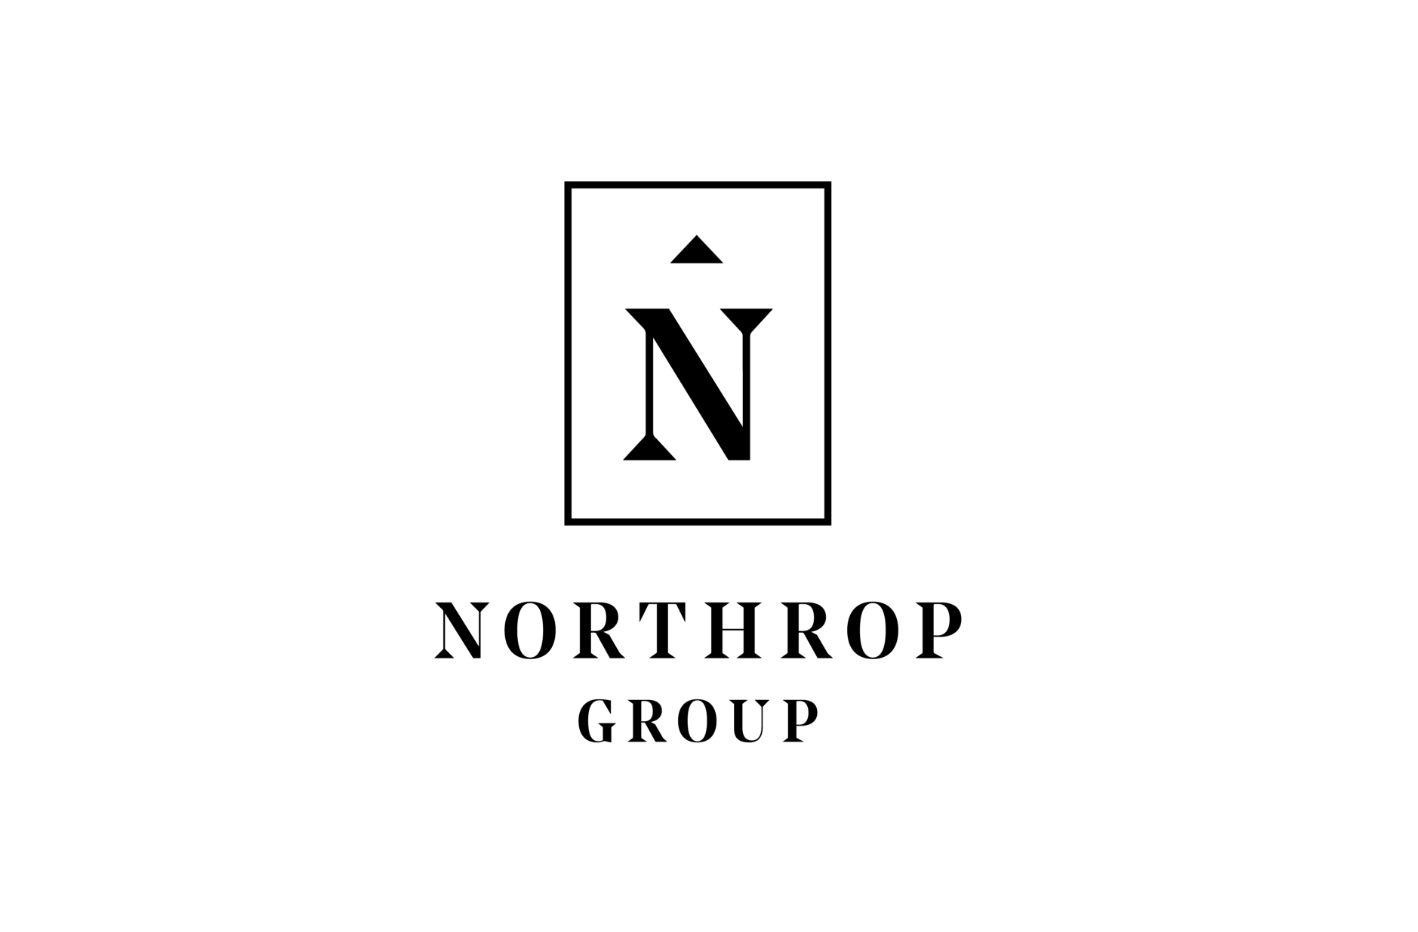 A text banner for Northrop Group